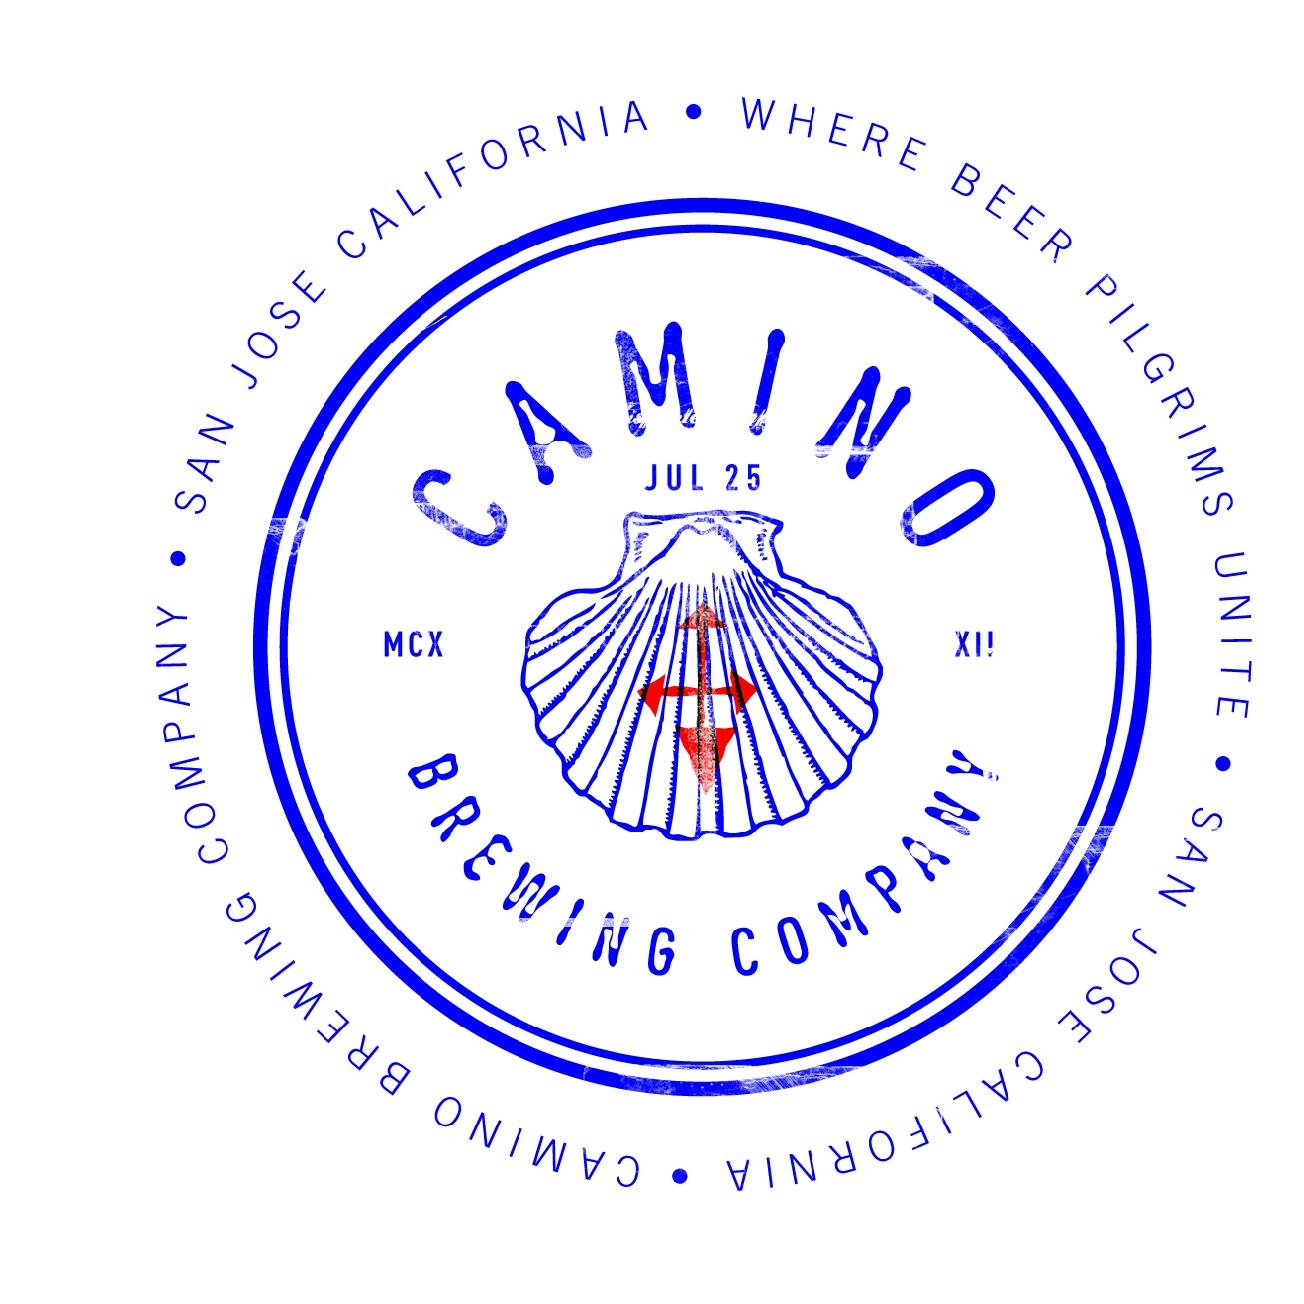 Camino Brewing Company brews craft specialty beers inspired by co-founders Allen and Nathan's 1900 mile bike pilgrimage along the Camino de Santiago.